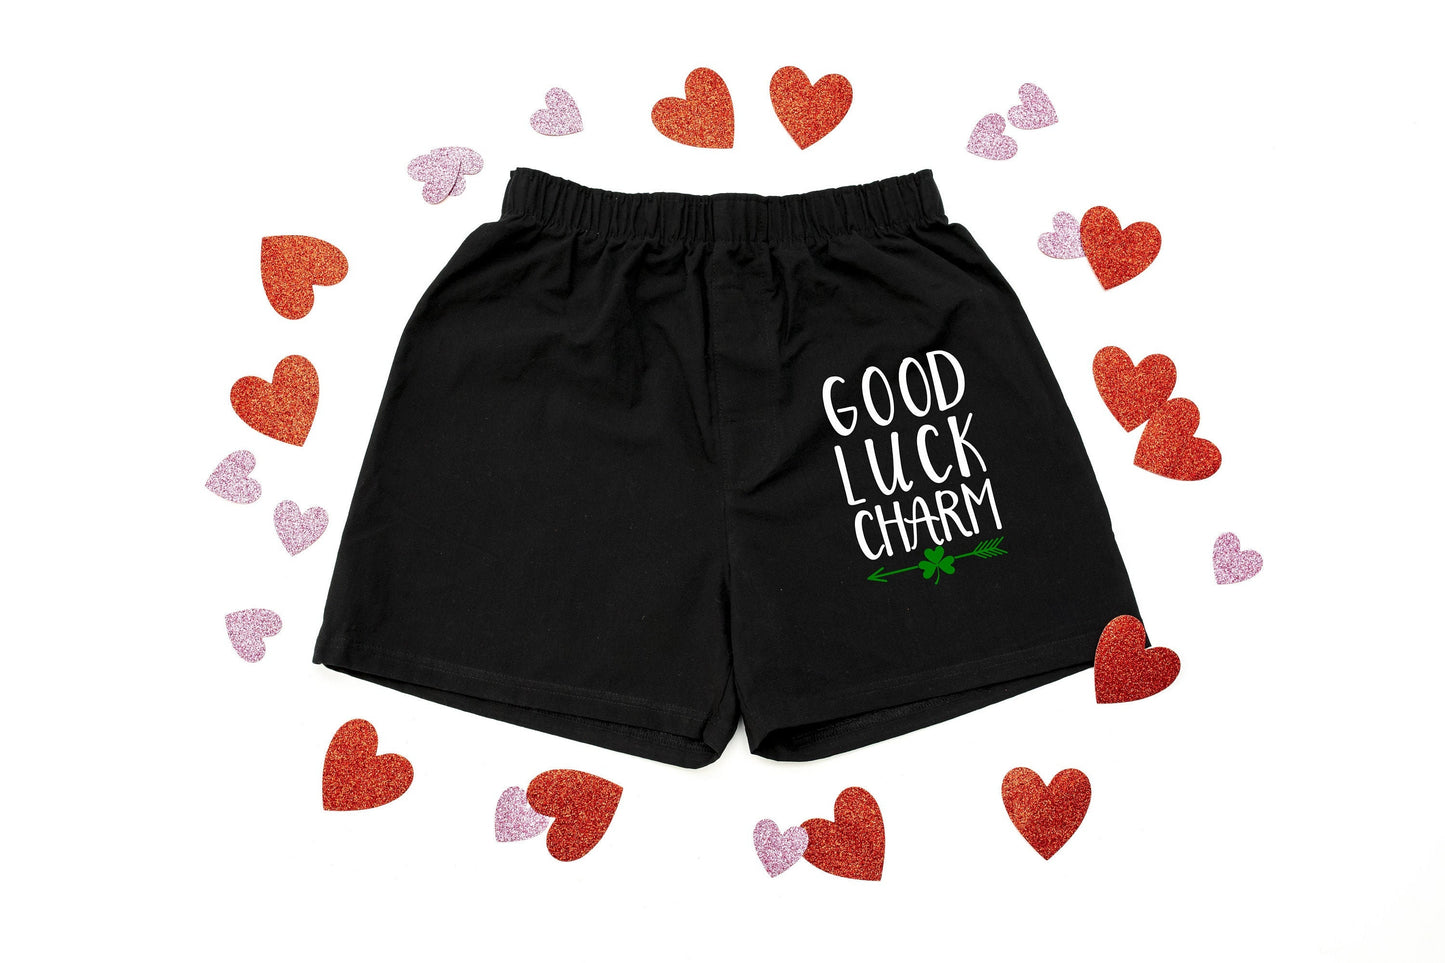 IMPROVED Good Luck Charm v2 Men's Super Soft Cotton Boxer Shorts - Gift for Him - Mens Boxers - Funny Boxers - Naughty Boxers